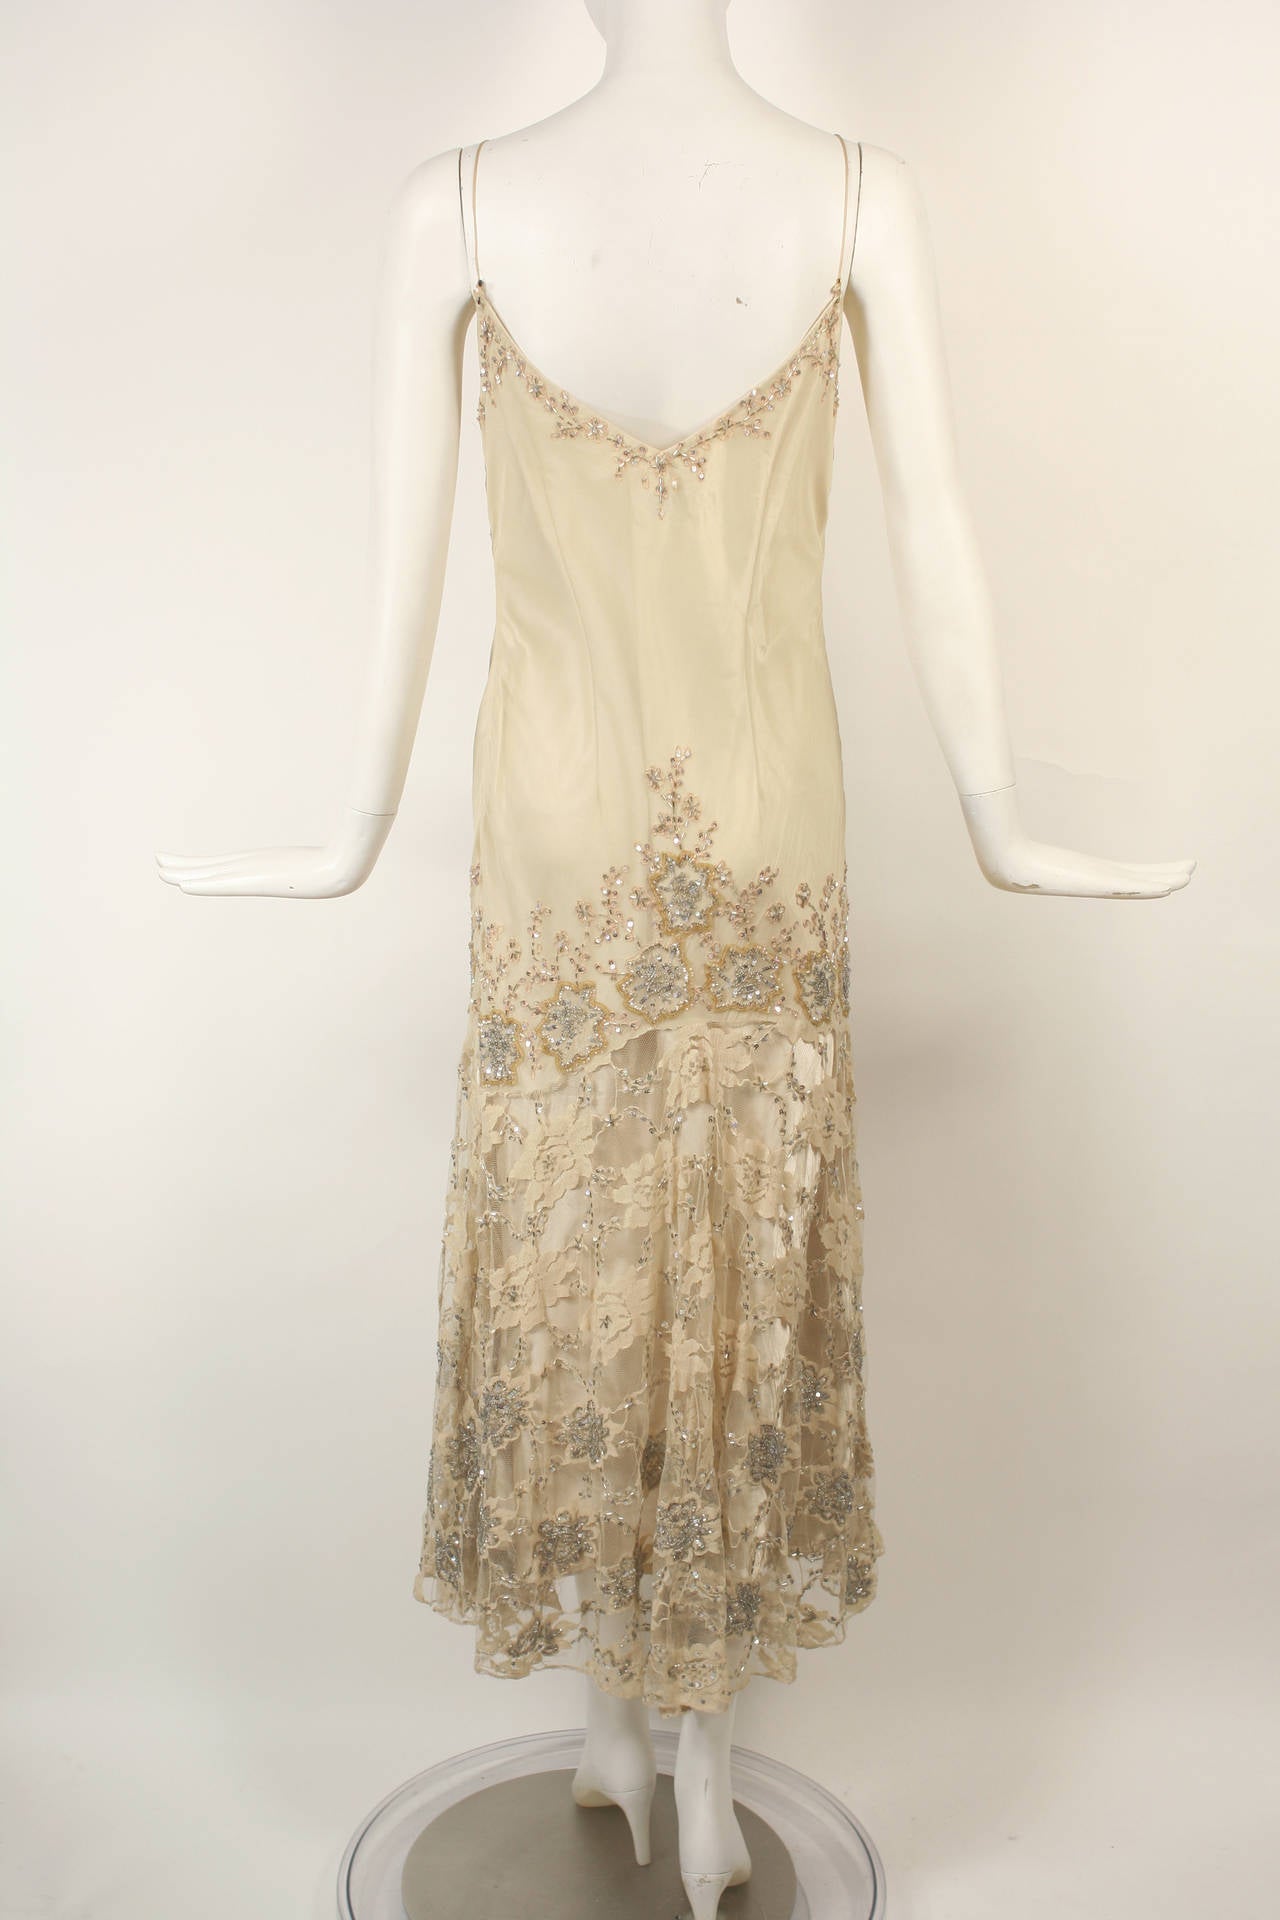 Exquisite Vintage Valentino Beaded Ivory Dress Gown For Sale 1